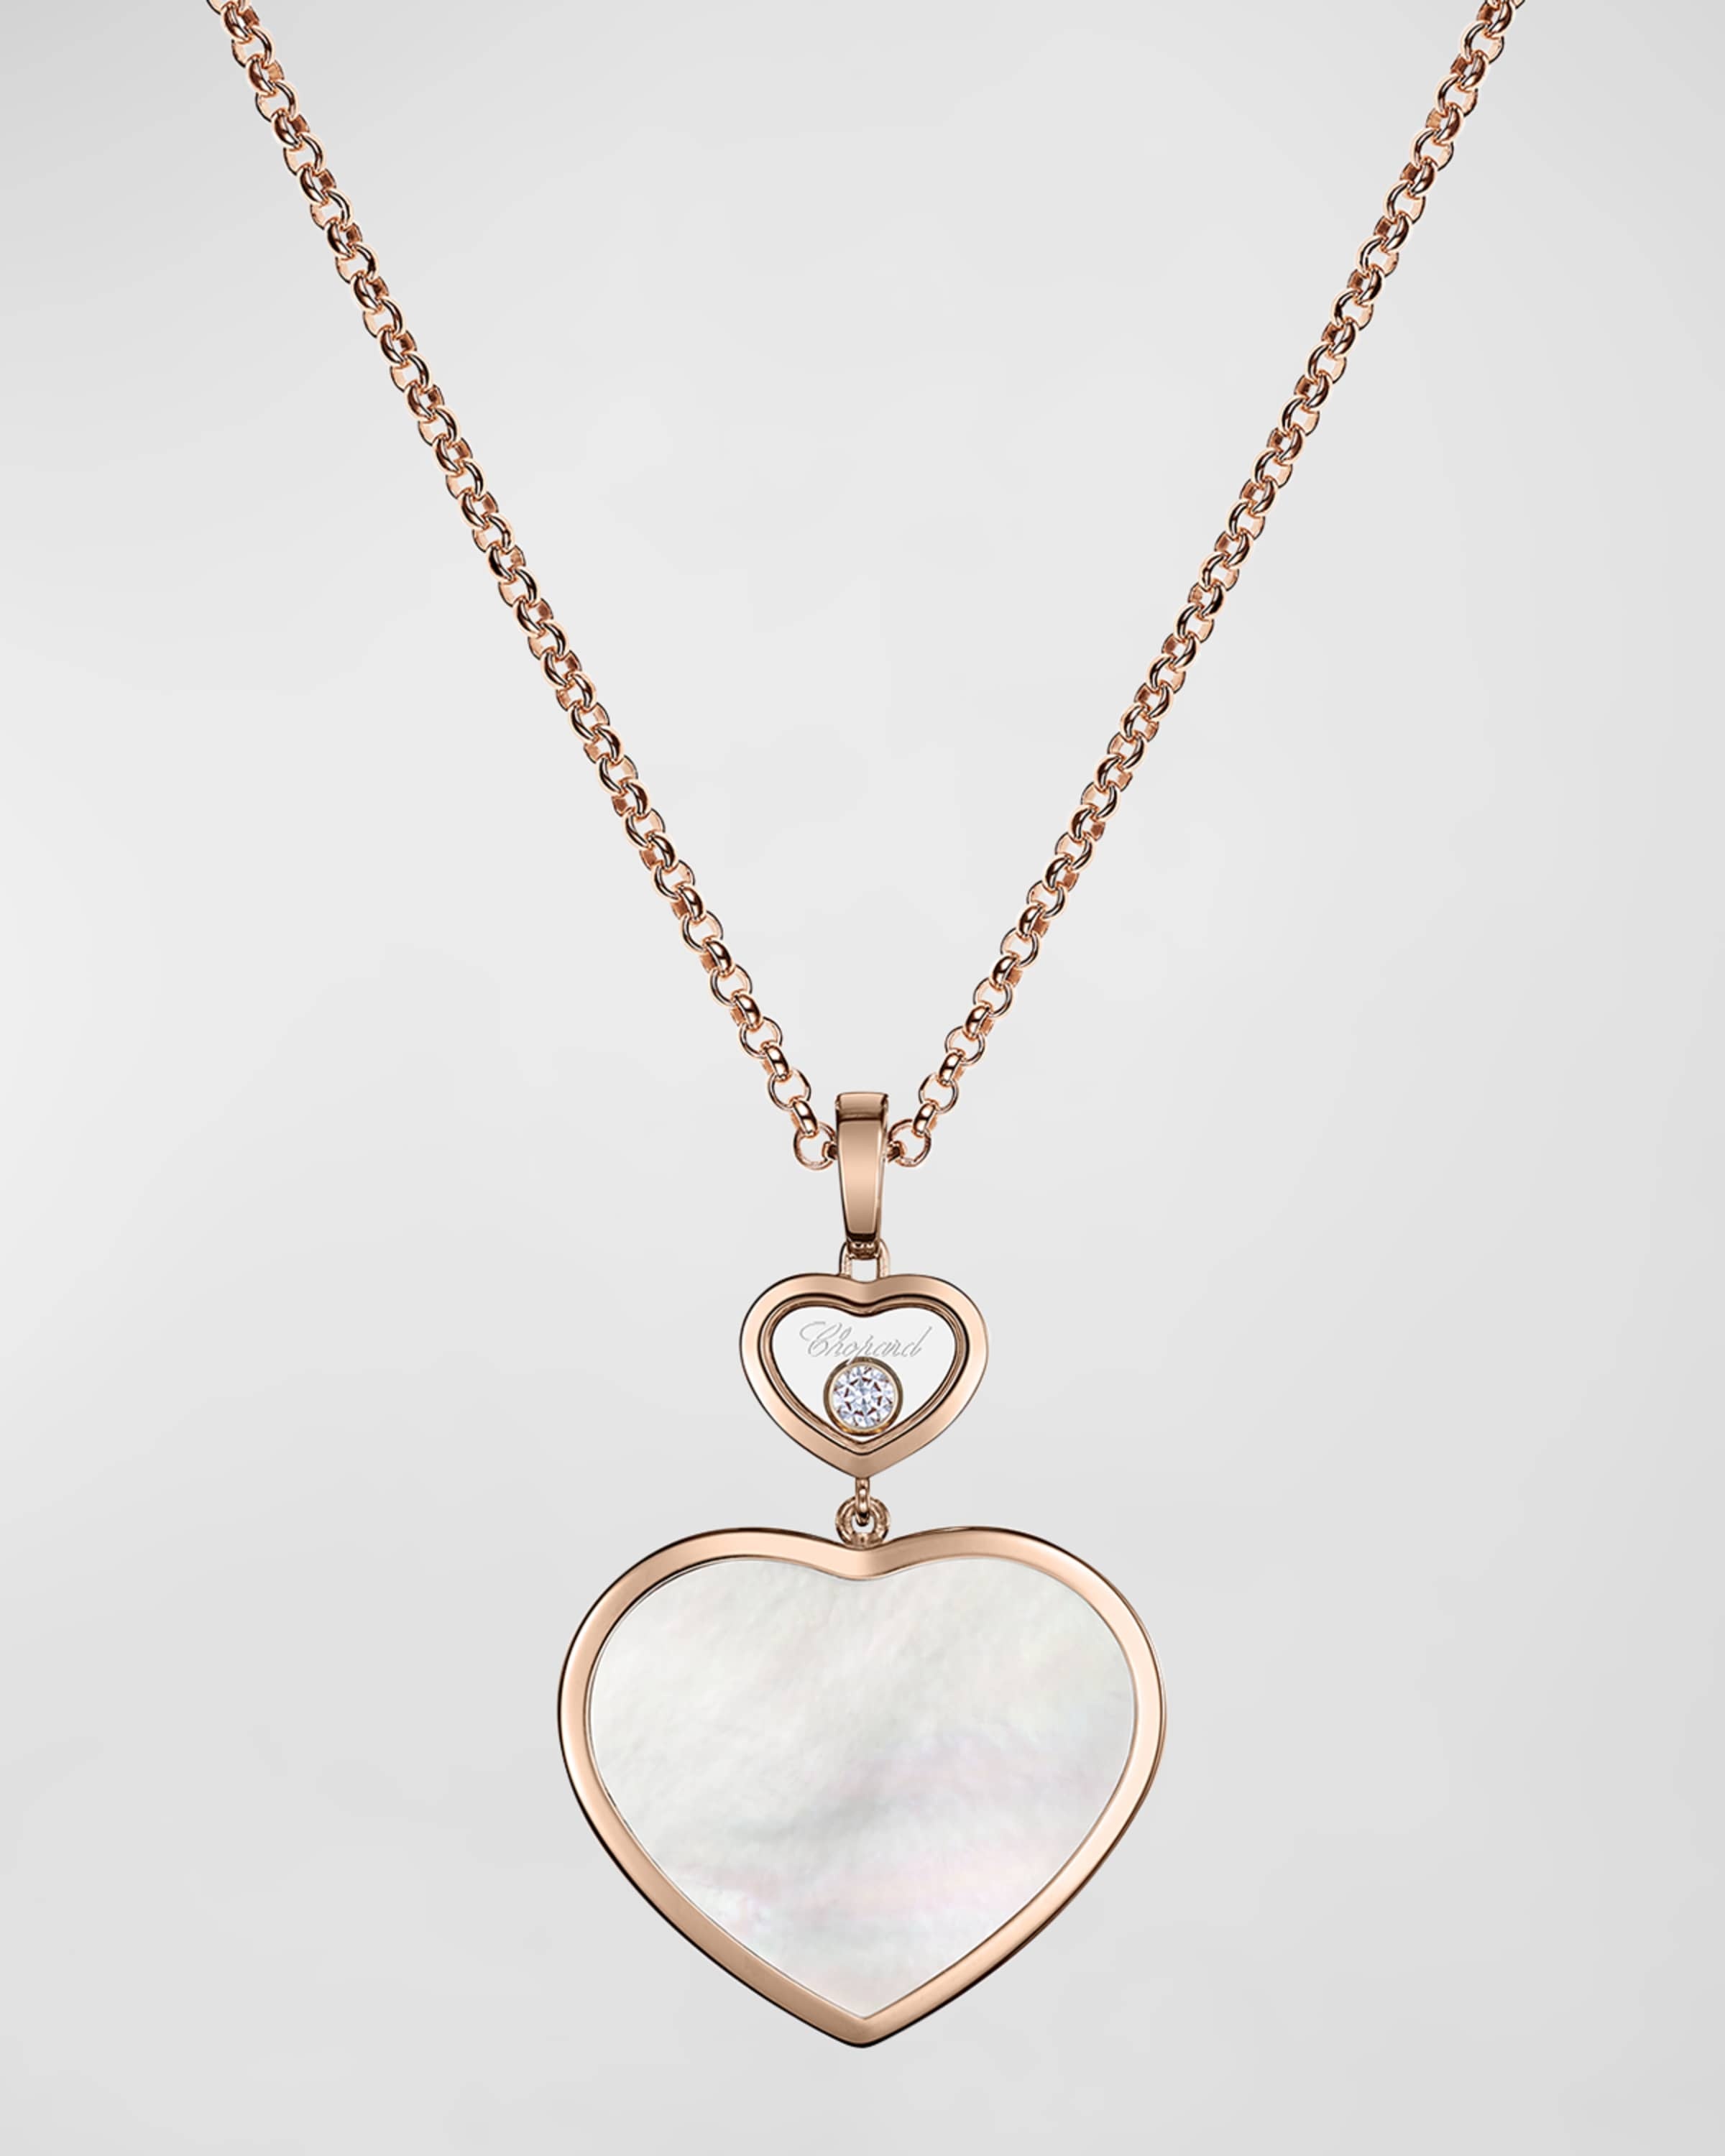 Happy Hearts 18K Rose Gold & Mother-of-Pearl Necklace with Diamond - 1